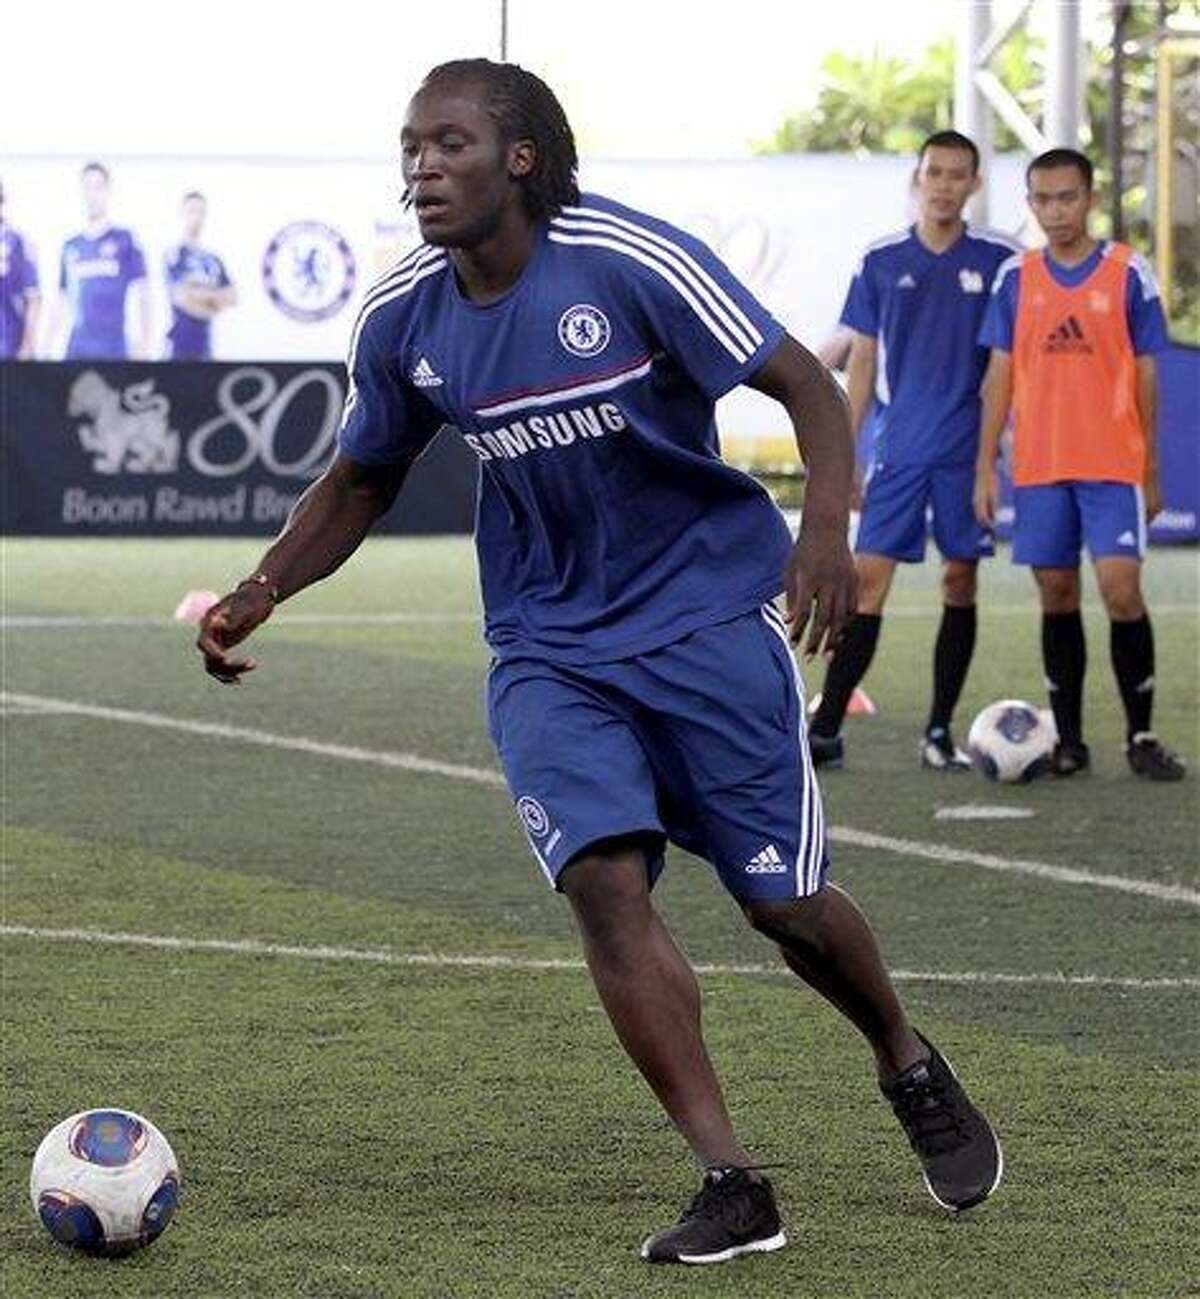 Romelu Lukaku of Chelsea shows his soccer skill to Thai youth during a soccer coaching clinic for Thai students in Bangkok, Thailand Monday, July 15, 2013. Chelsea will play against Thailand Singha All Star on Wednesday, July 17, 2013. (AP Photo/Apichart Weerawong)